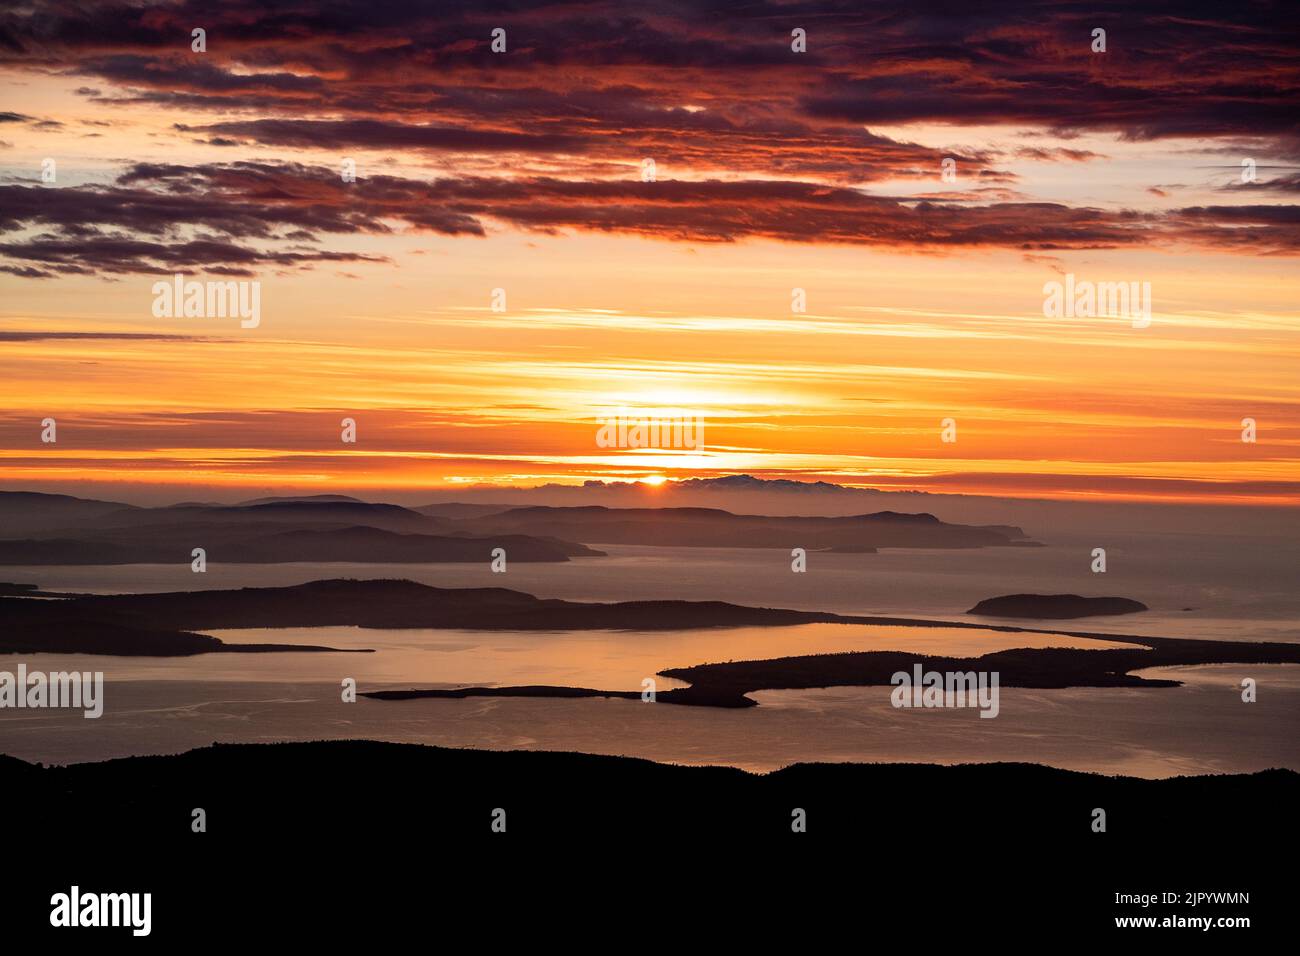 Sunrise over the Derwent River from the summit of kunanyi/Mt Wellington in Hobart Tasmania (altitude 1271 metres above sea level) Stock Photo